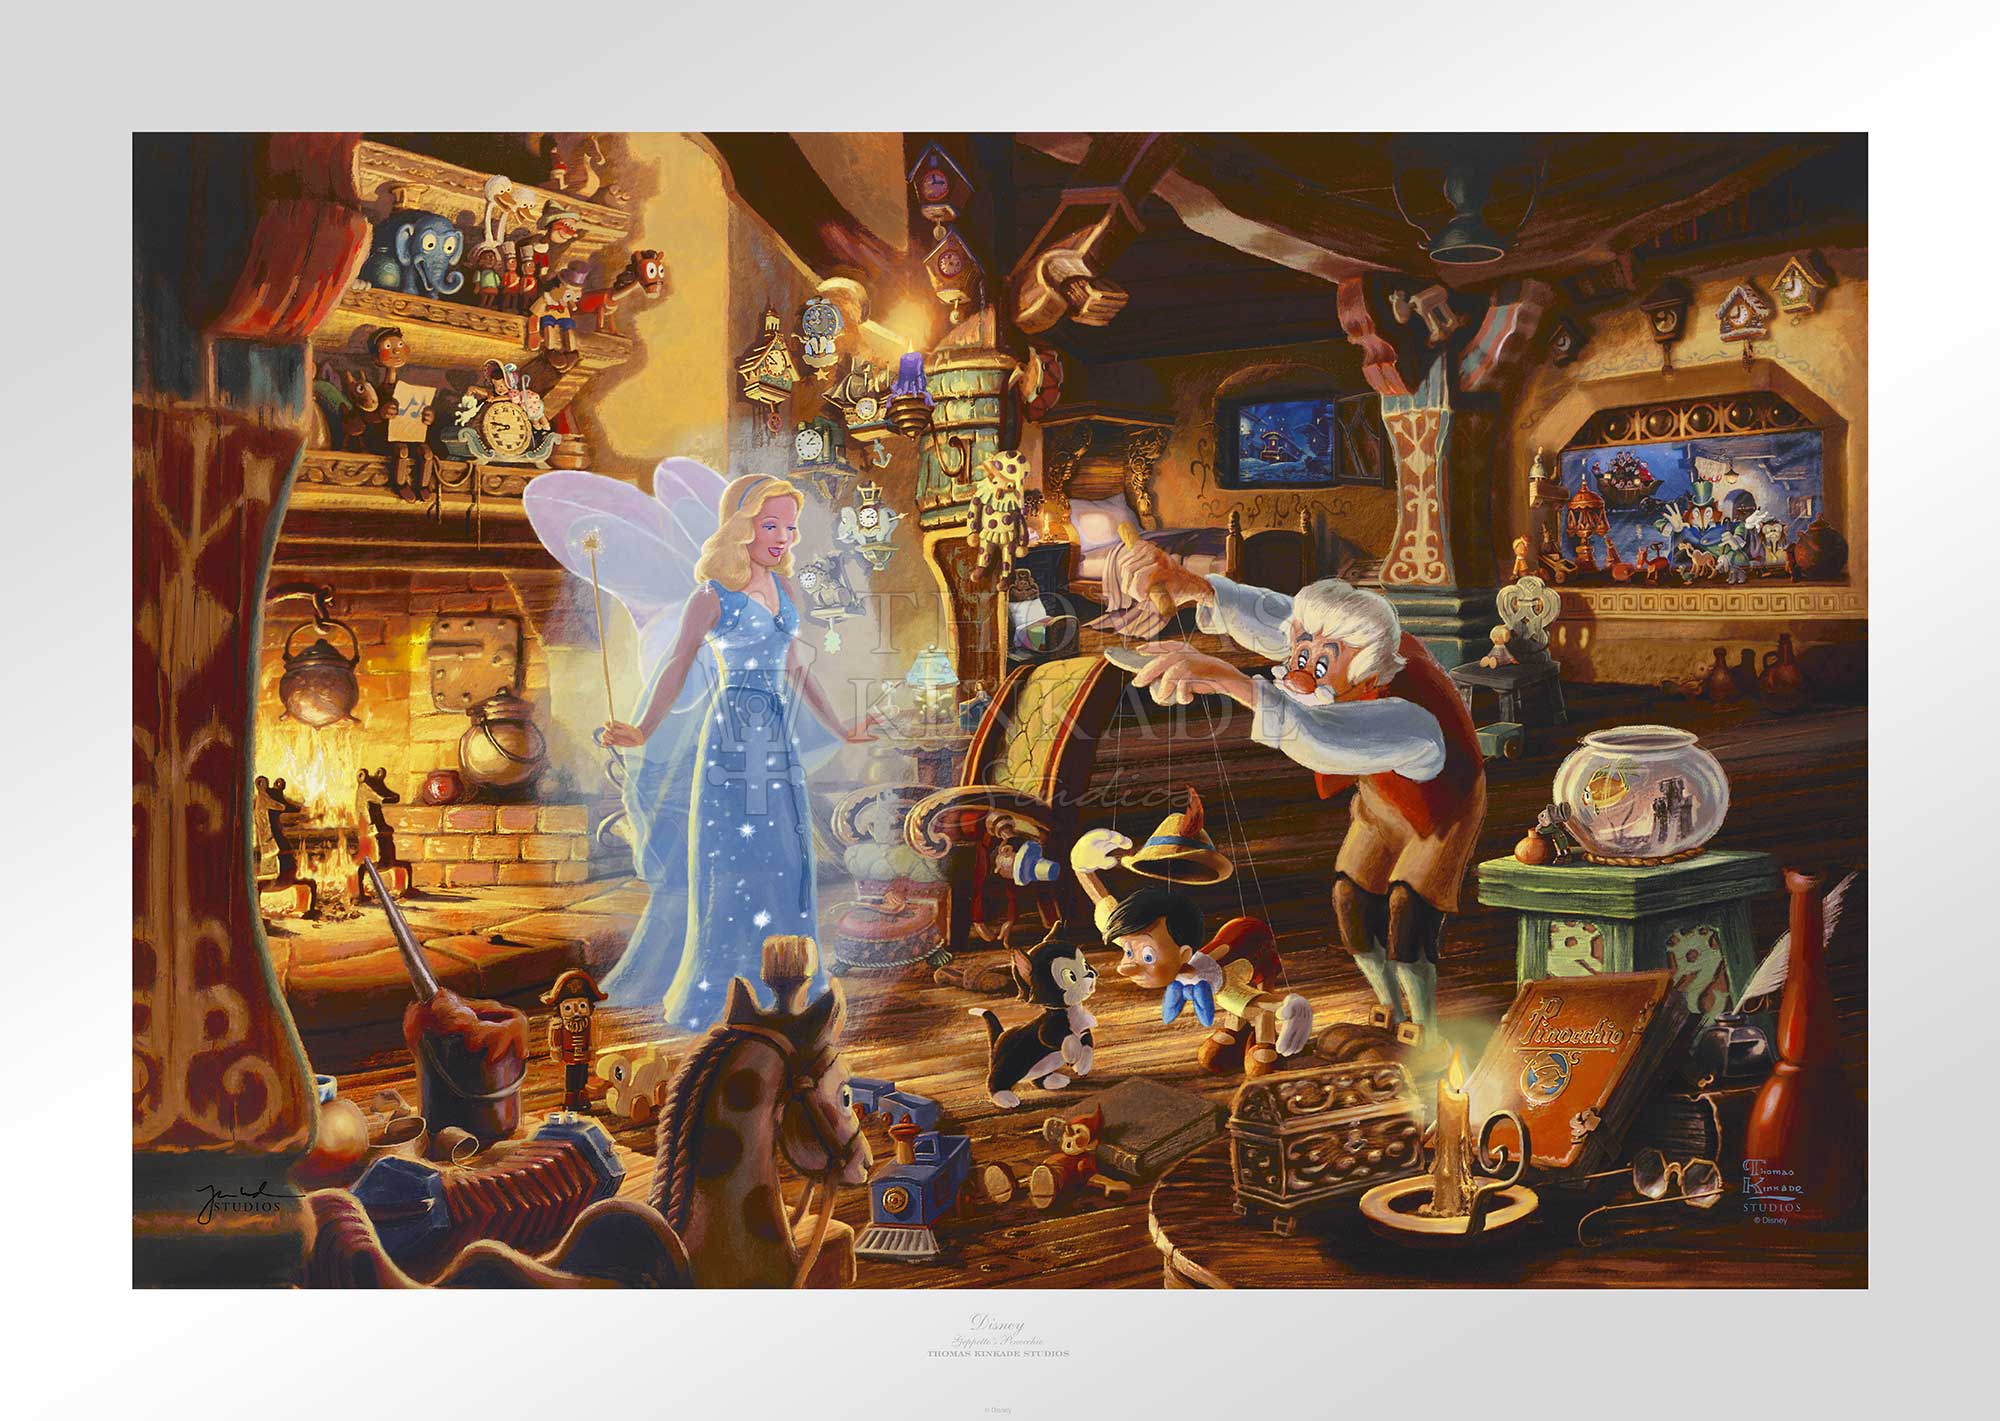 The Blue Fairy is poised to make this wish come true. Joy fills the workshop as Geppetto’s wish is granted.  Paper Unframed